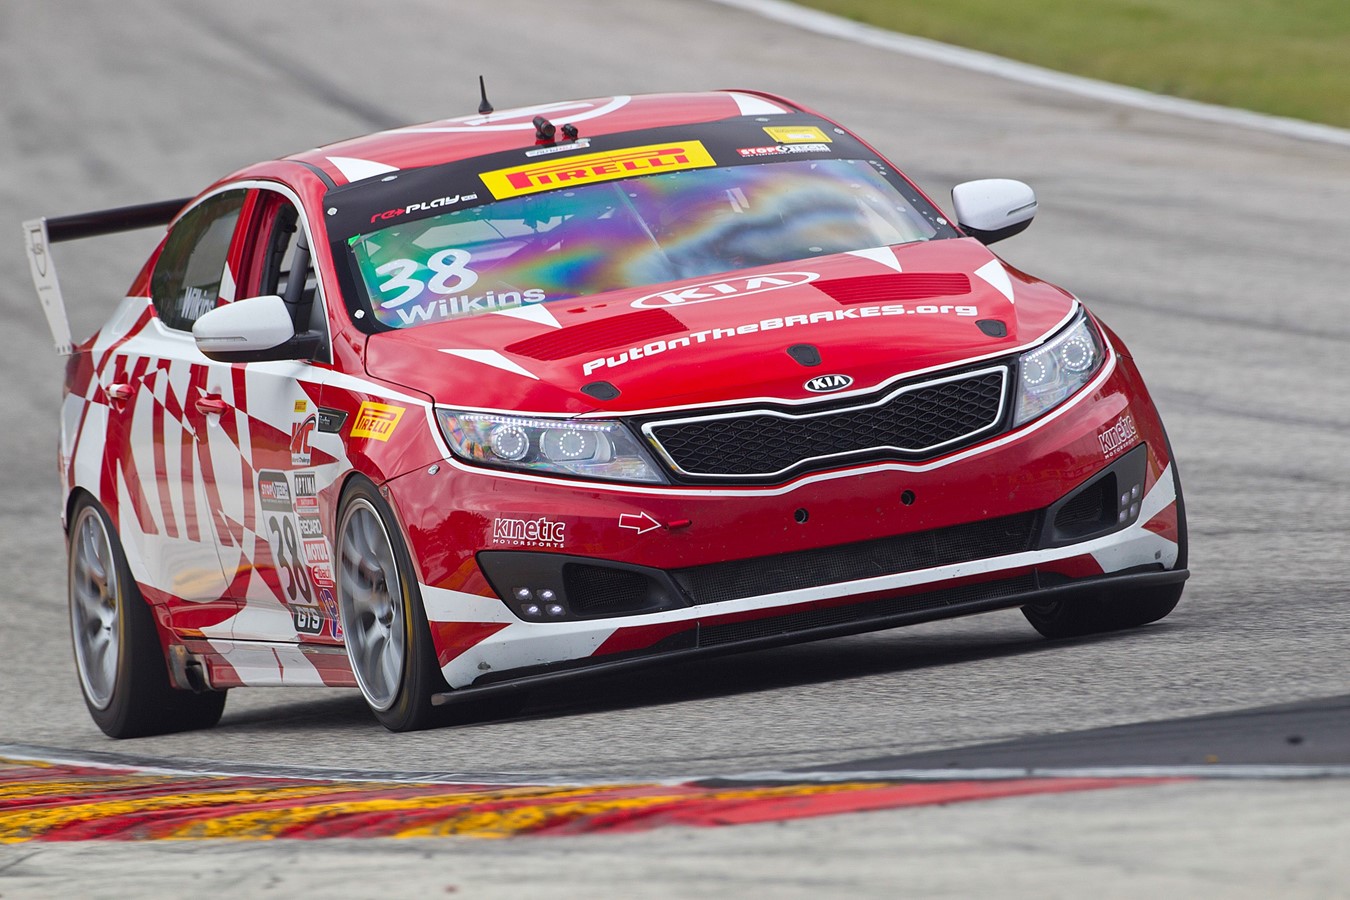 KIA RACING SCORES BACK-TO-BACK PODIUM FINISHES DURING ROUNDS NINE AND TEN OF THE PIRELLI WORLD CHALLENGE AT ROAD AMERICA